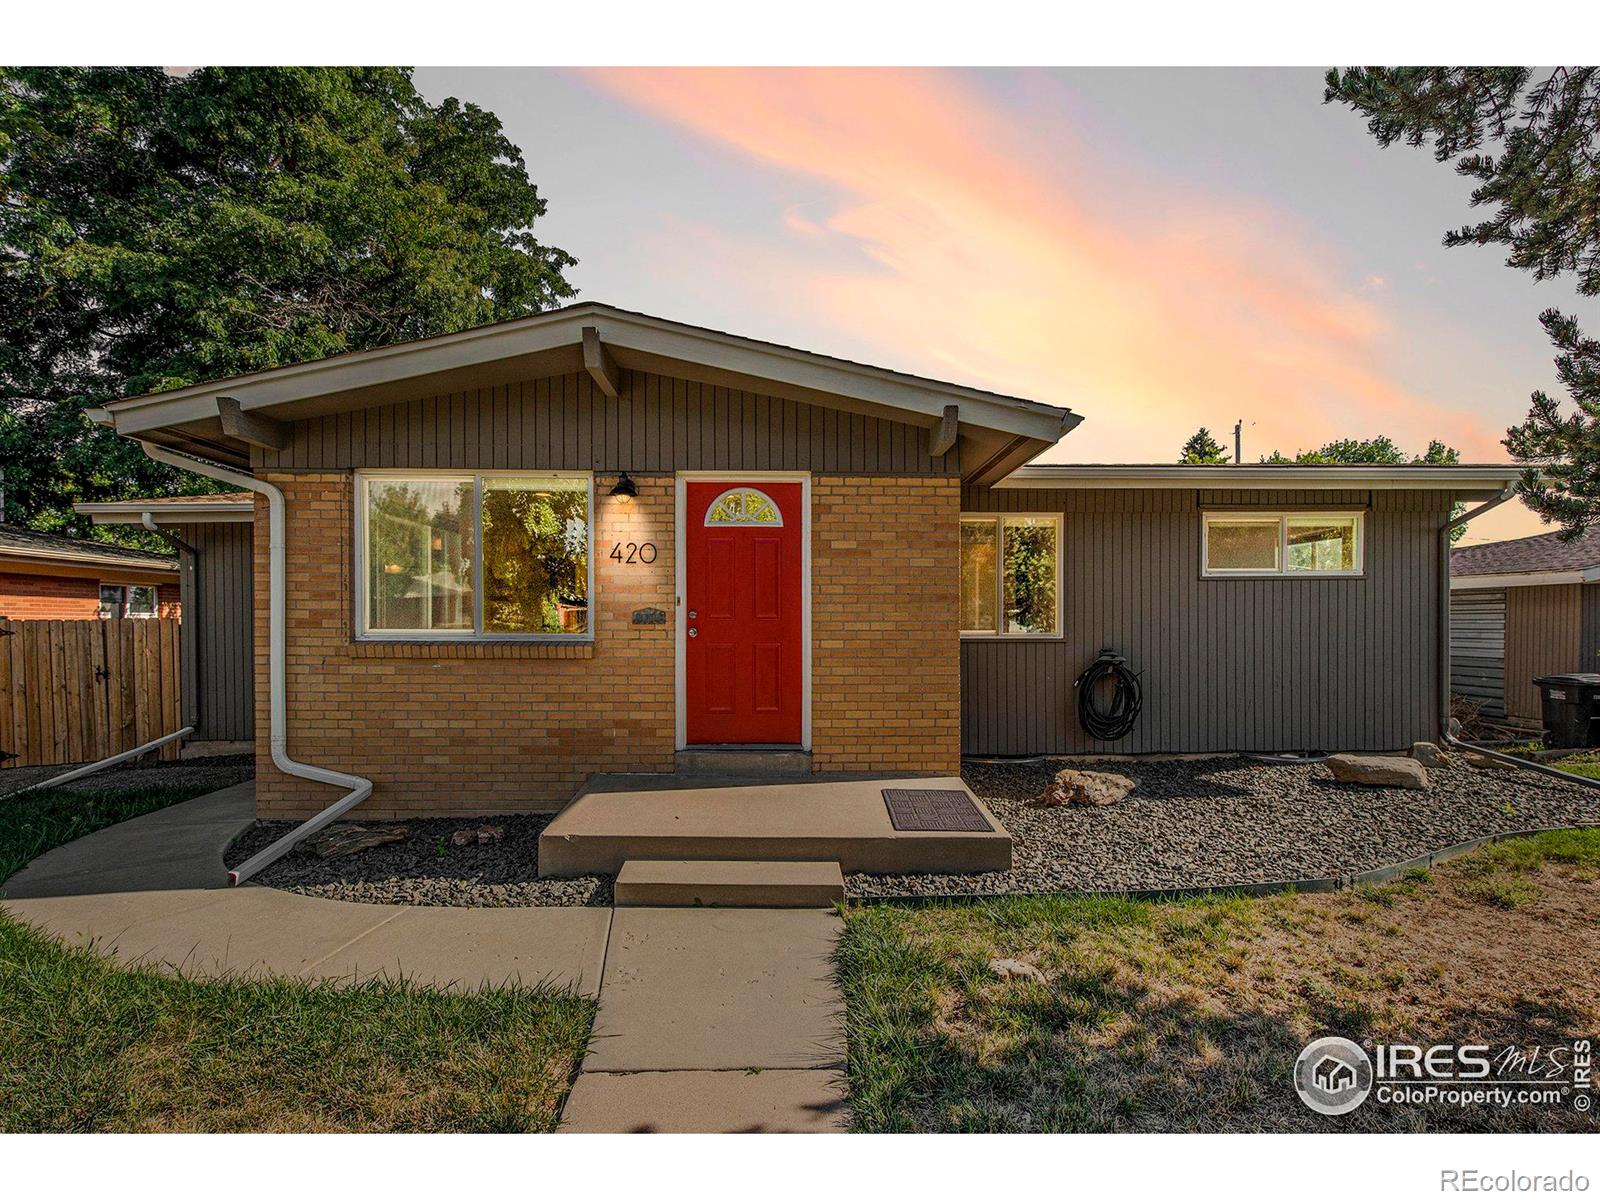 420 W Midway Boulevard, broomfield MLS: 123456789996580 Beds: 5 Baths: 2 Price: $525,000